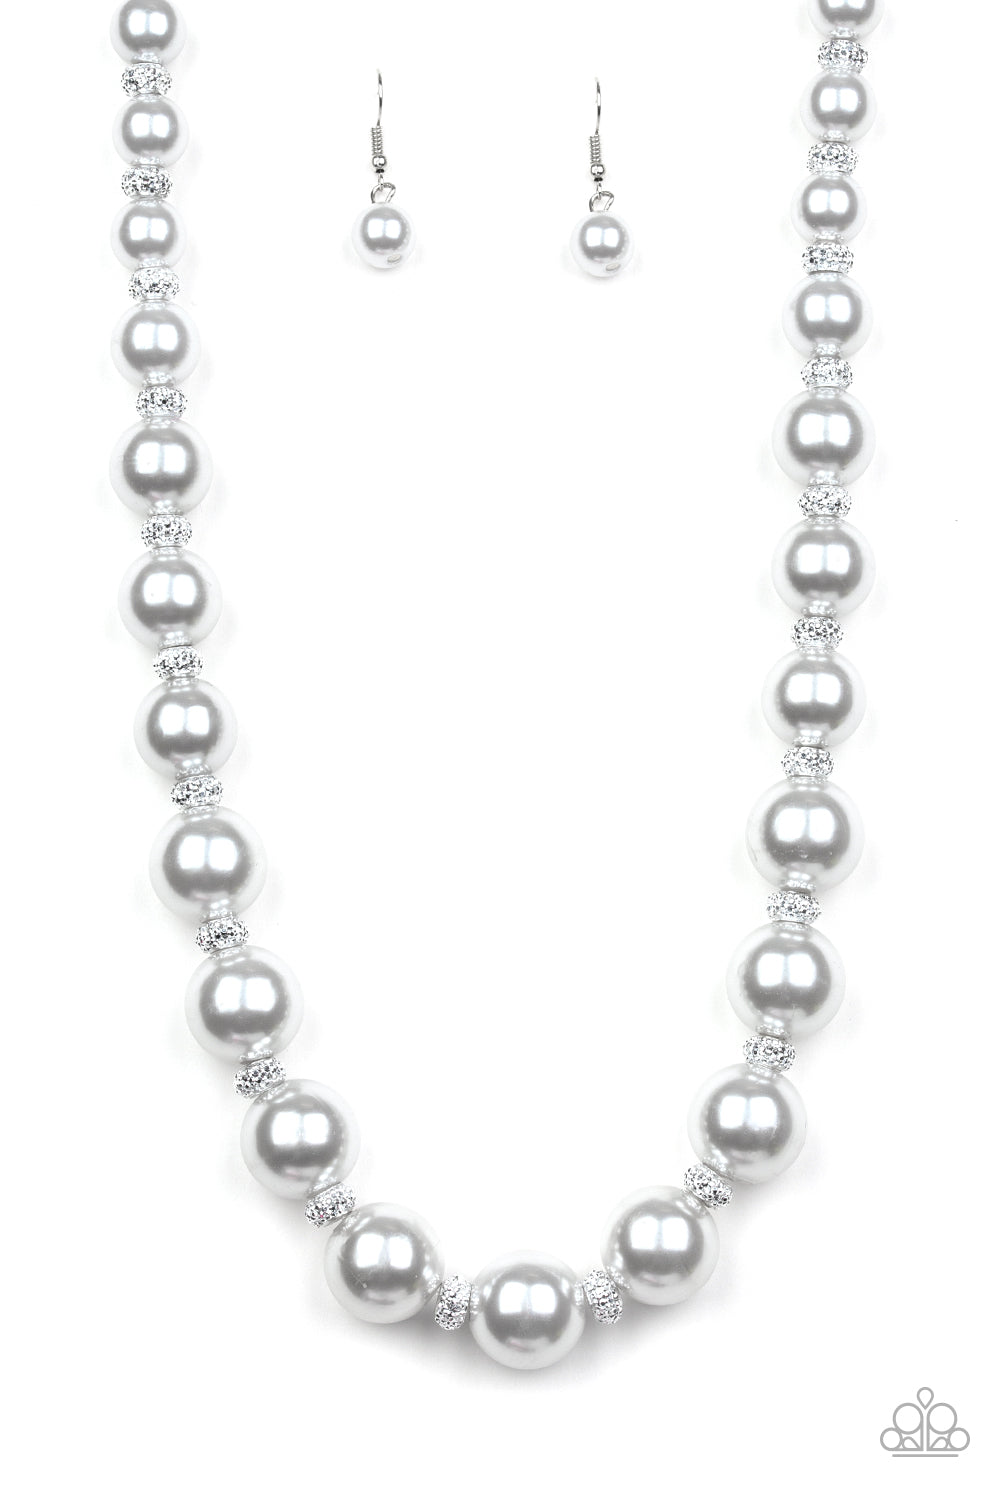 Paparazzi Accessories Uptown Heiress - Silver Necklaces - Lady T Accessories